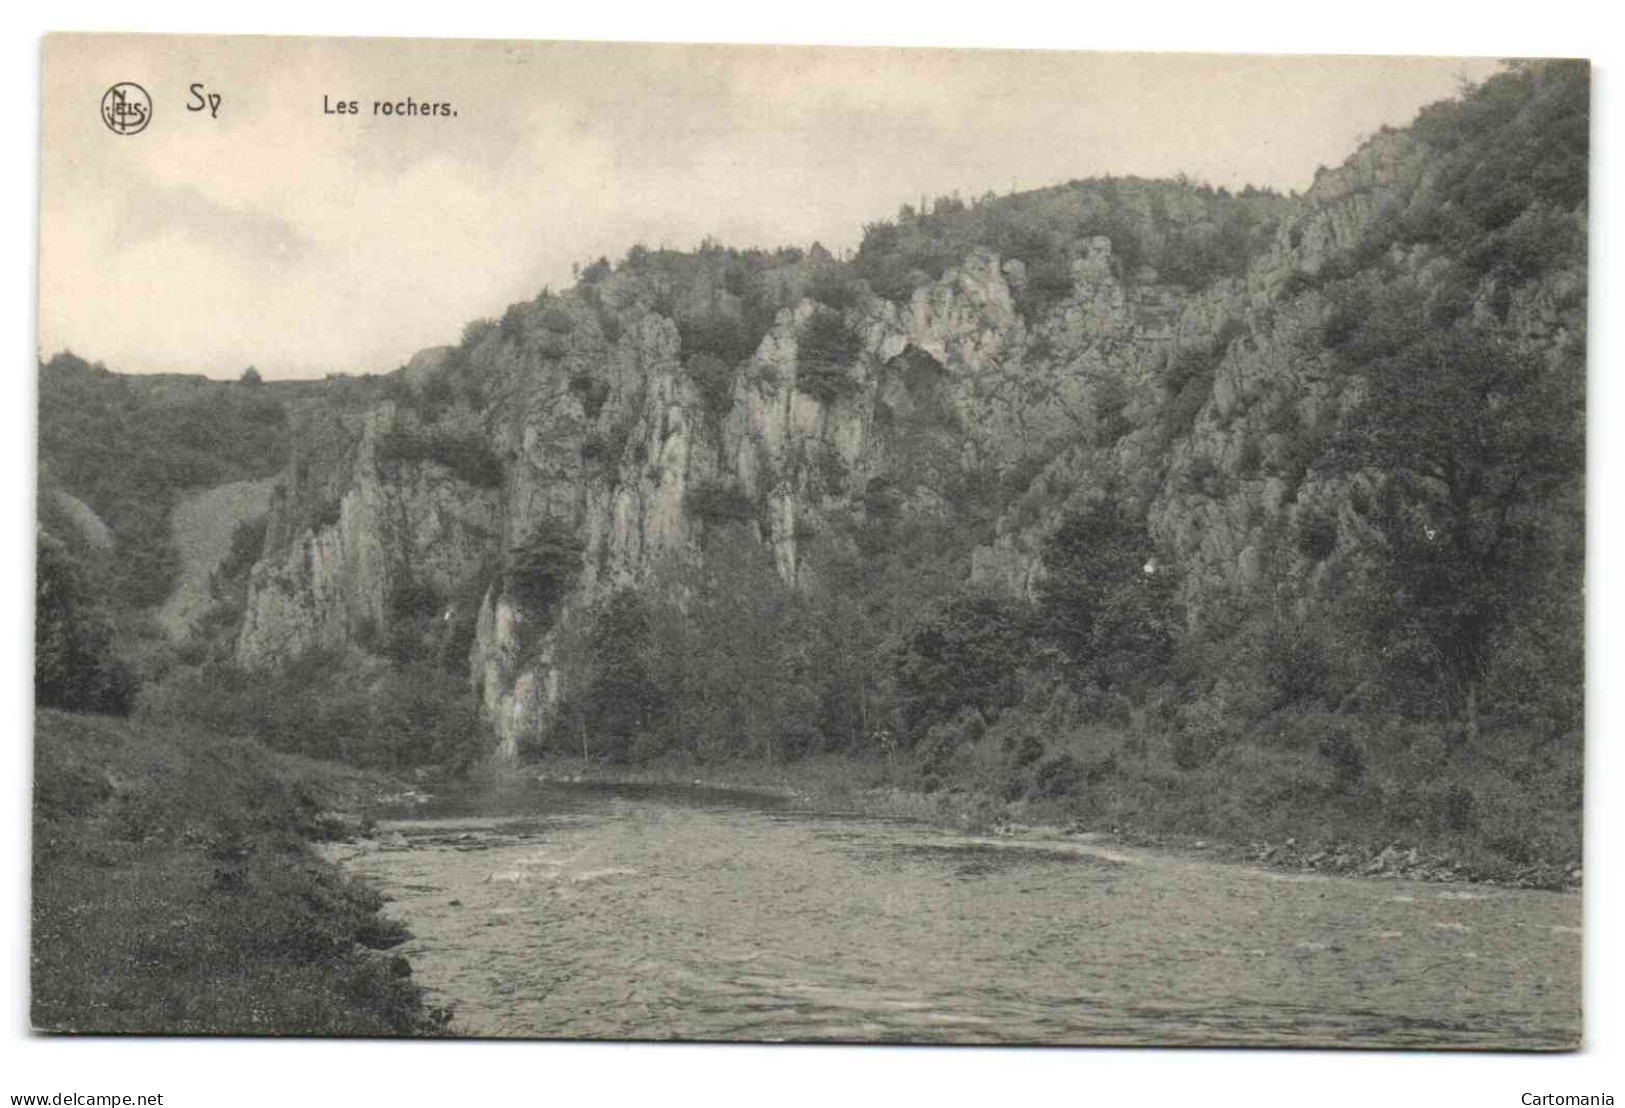 Sy - Les Rochers - Ferrieres